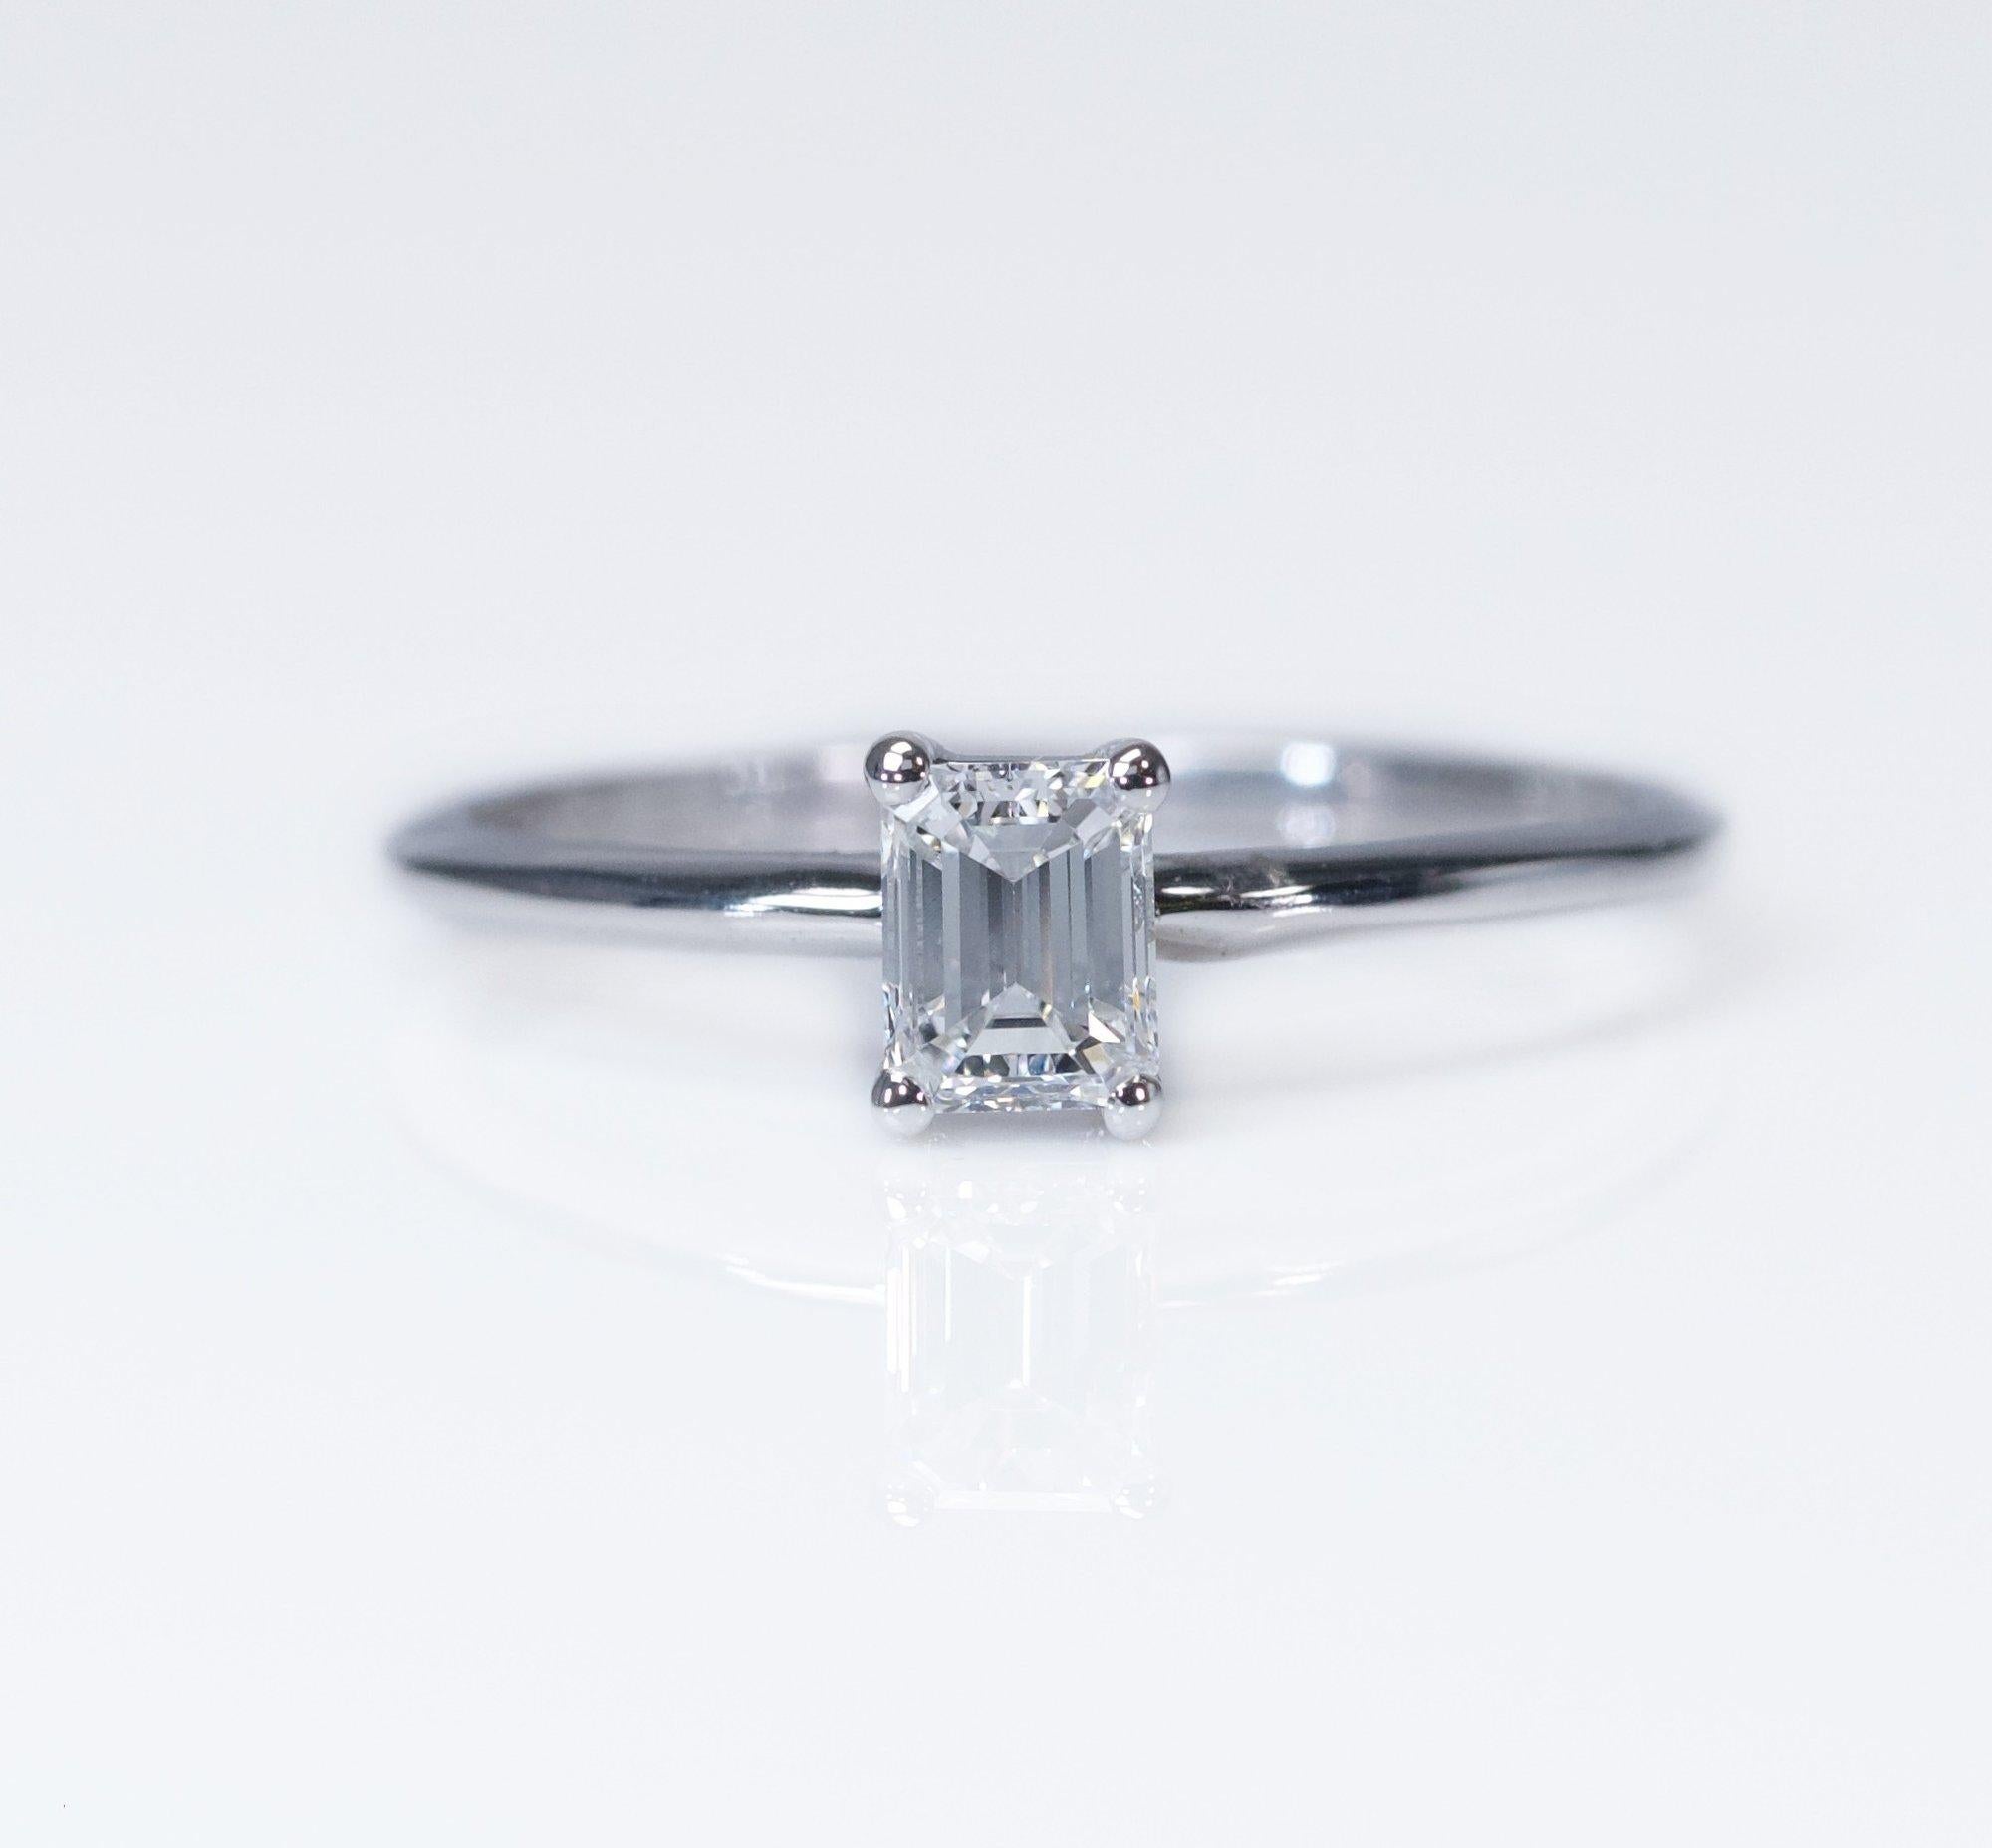 Gorgeous Ring with fine and Natural emerald cut diamond in a 0.41 carat E VS2 with Beautiful cut and shine.
the ring made from 18 k size 54 in a white gold  This diamond comes with an GIA Certificate and laser inscription number.

GIA